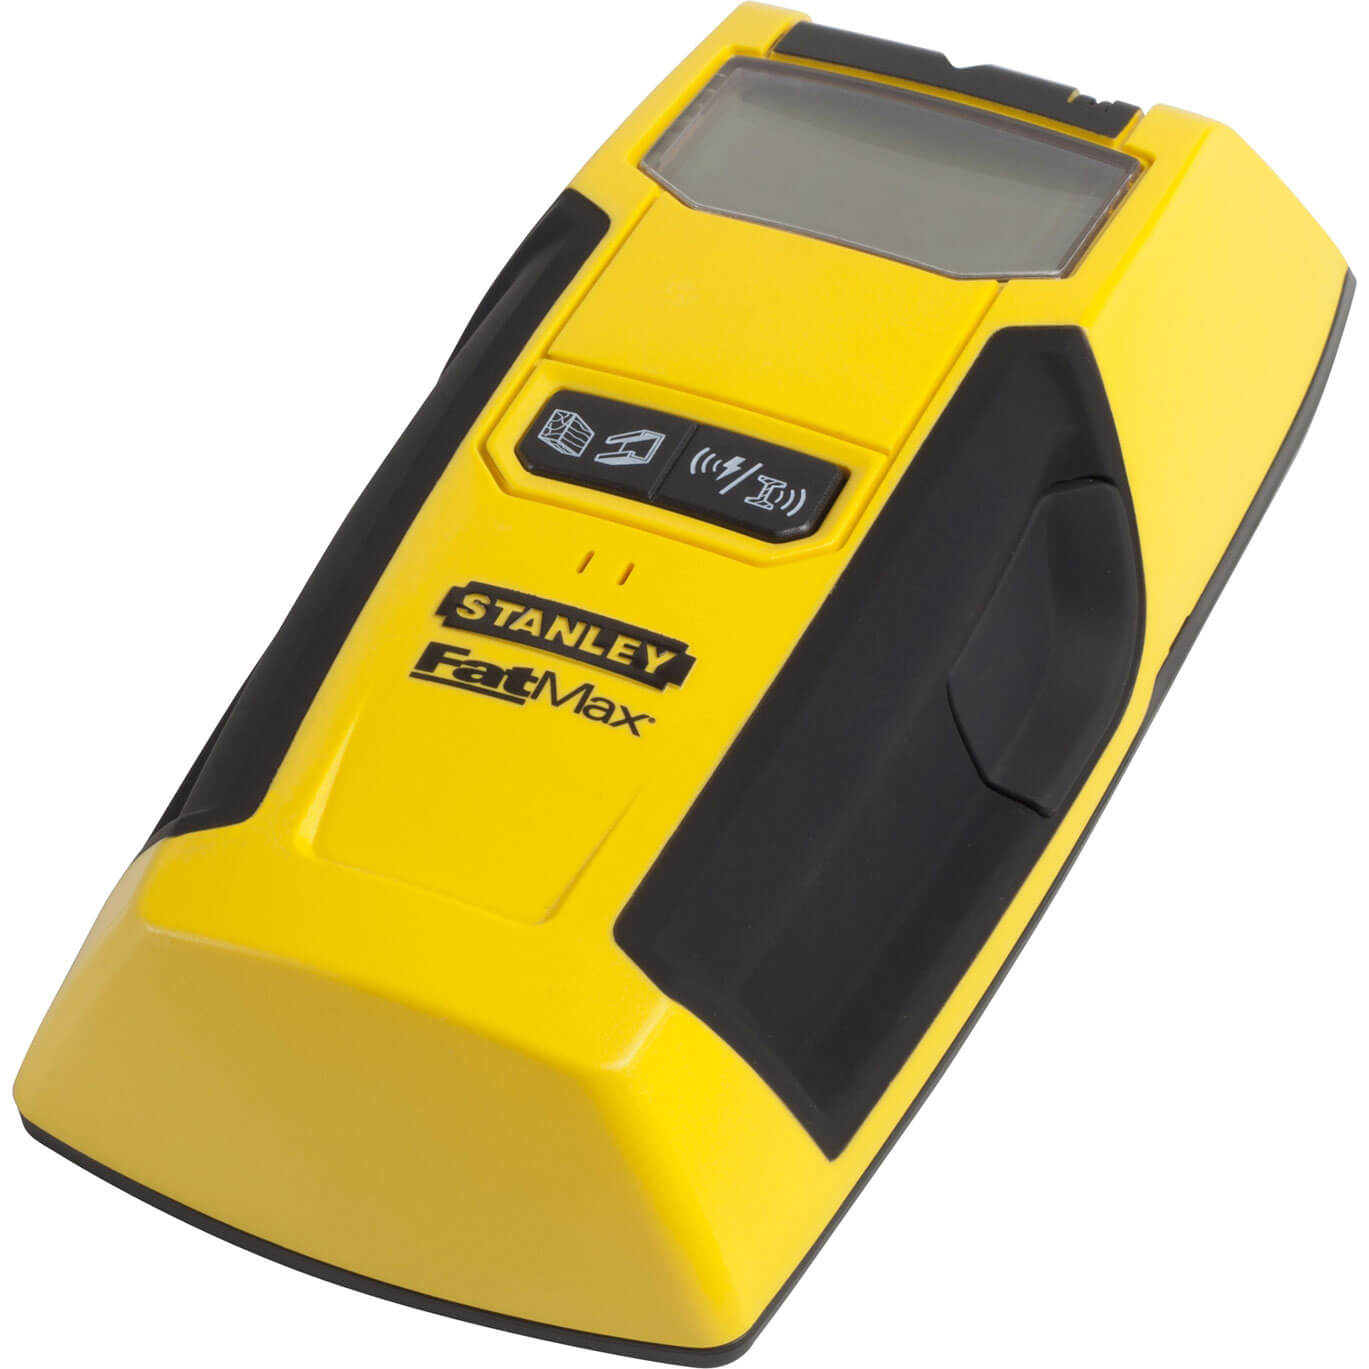 Stanley Intelli Stud Finder 300 Wall Scanner & Detector for Cables, Metal & Wood